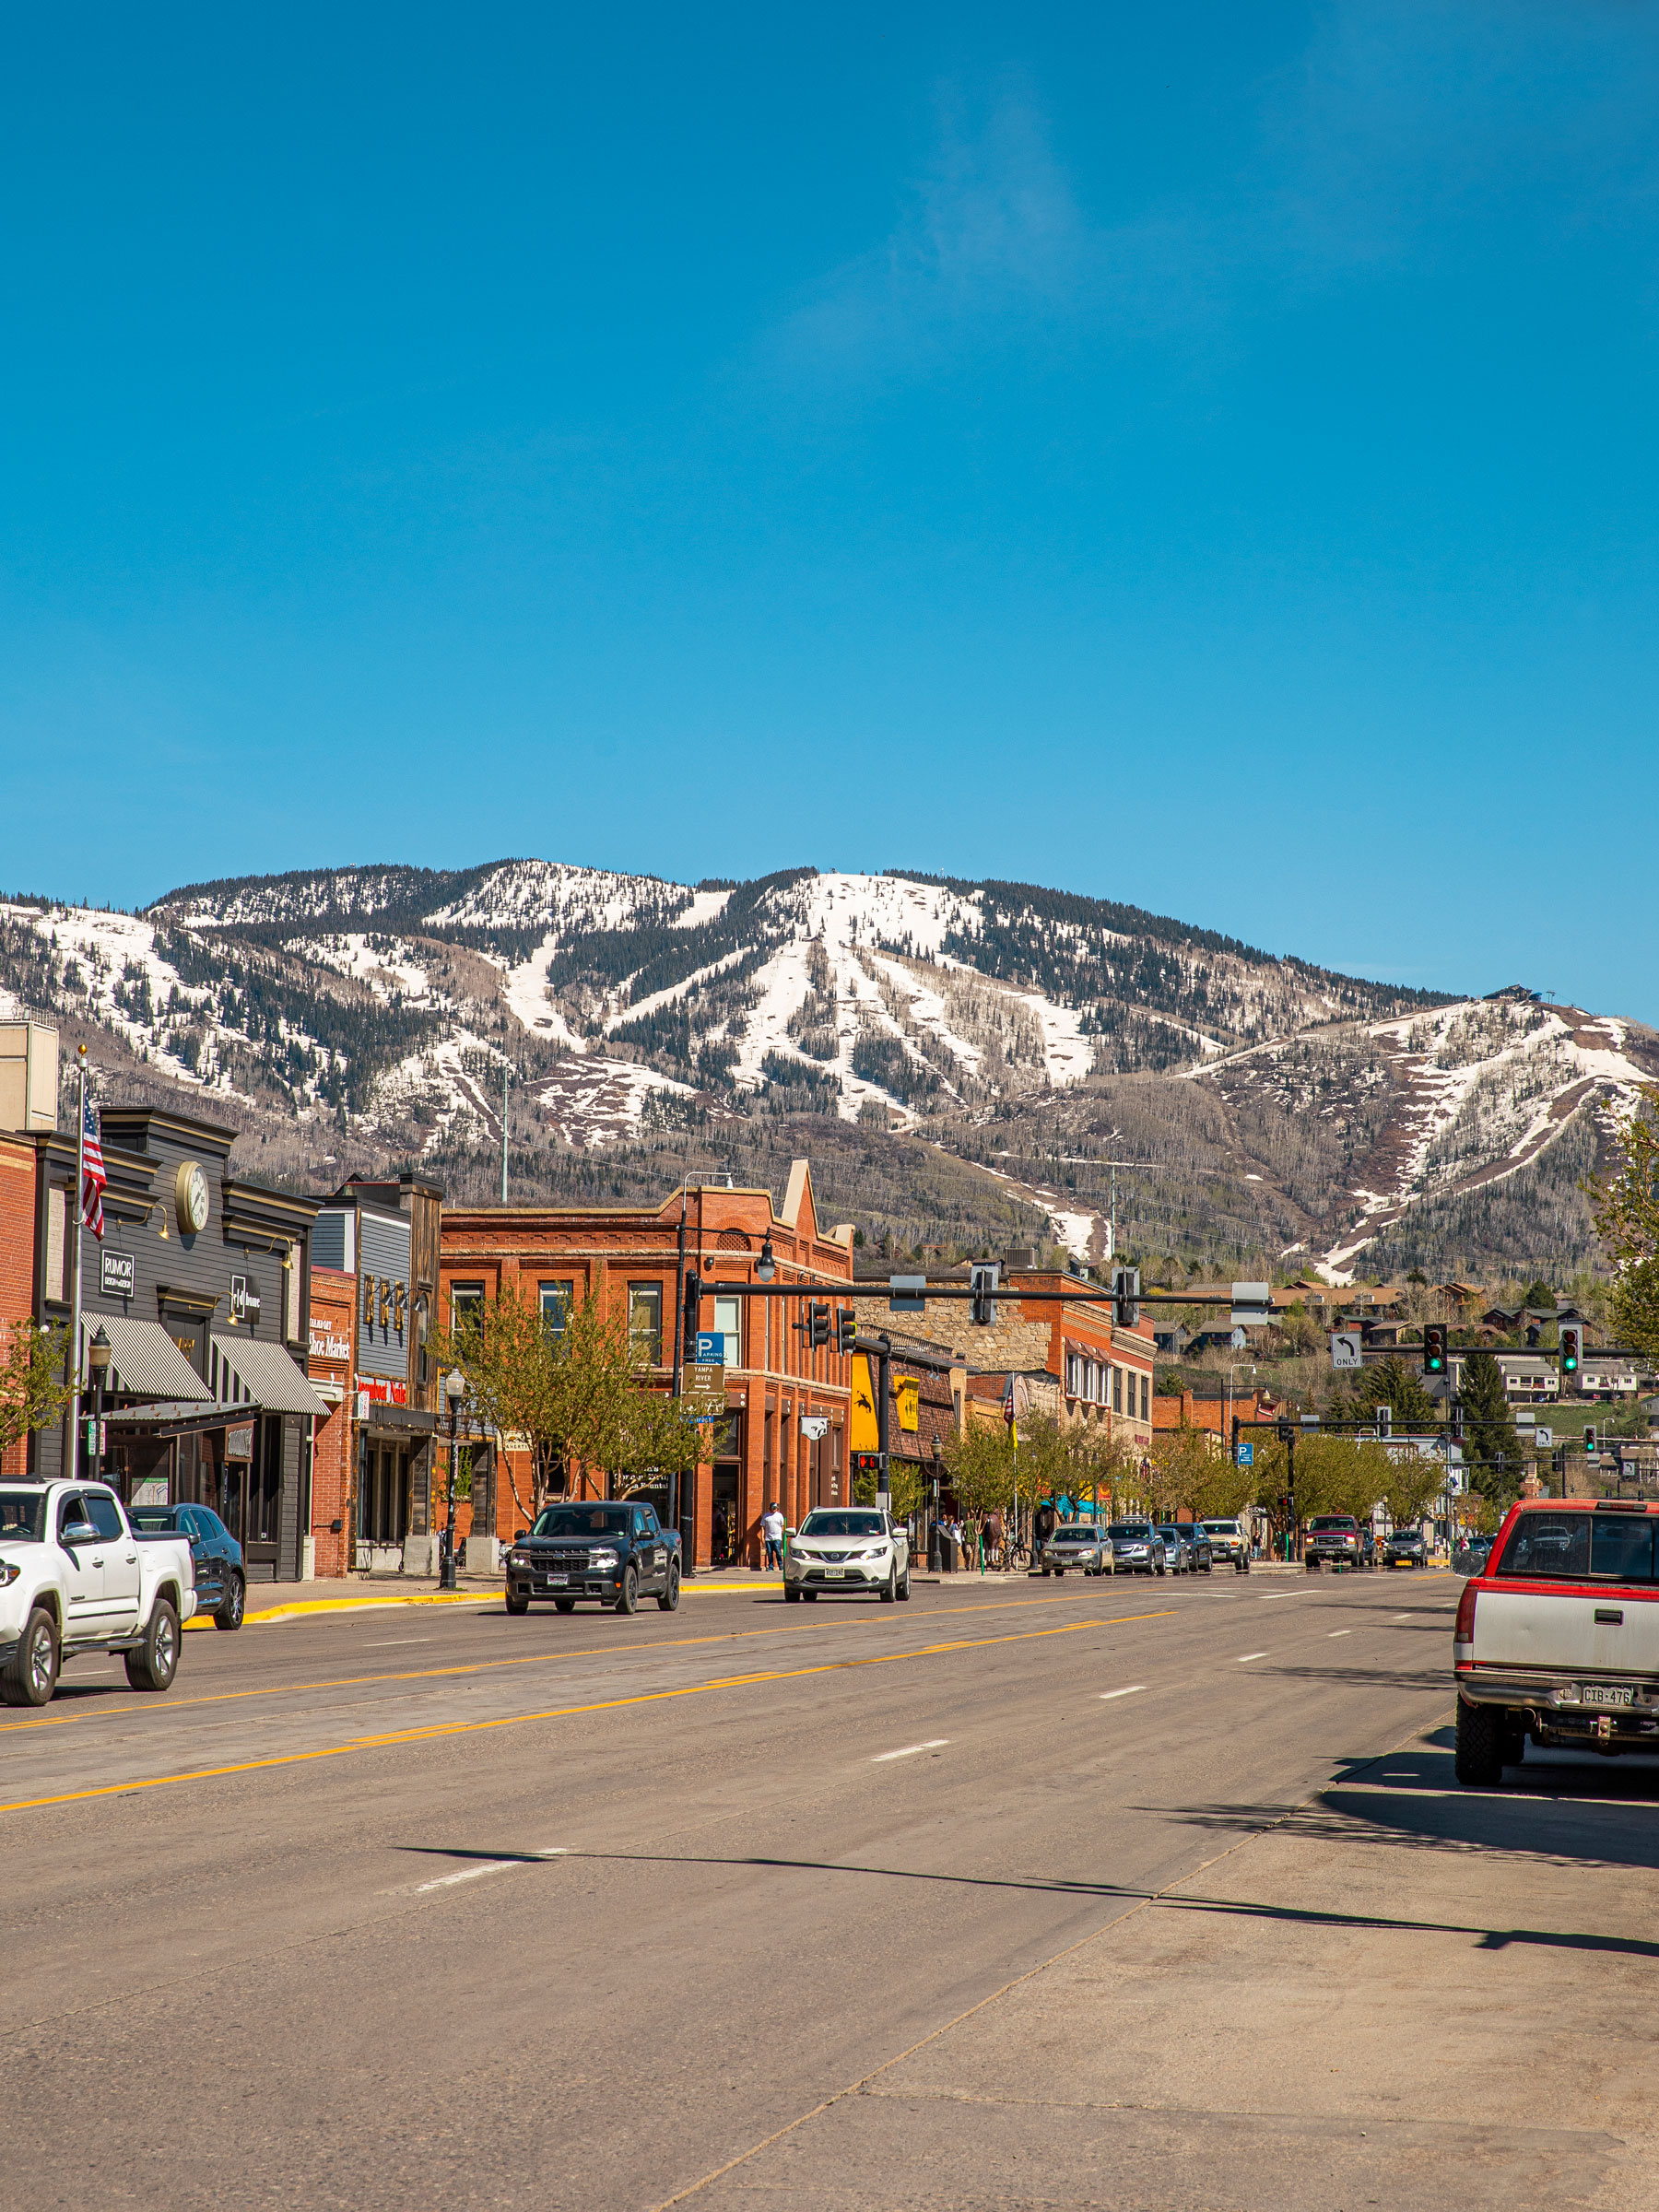 Traffic passes through the downtown area of Steamboat Springs, Colorado